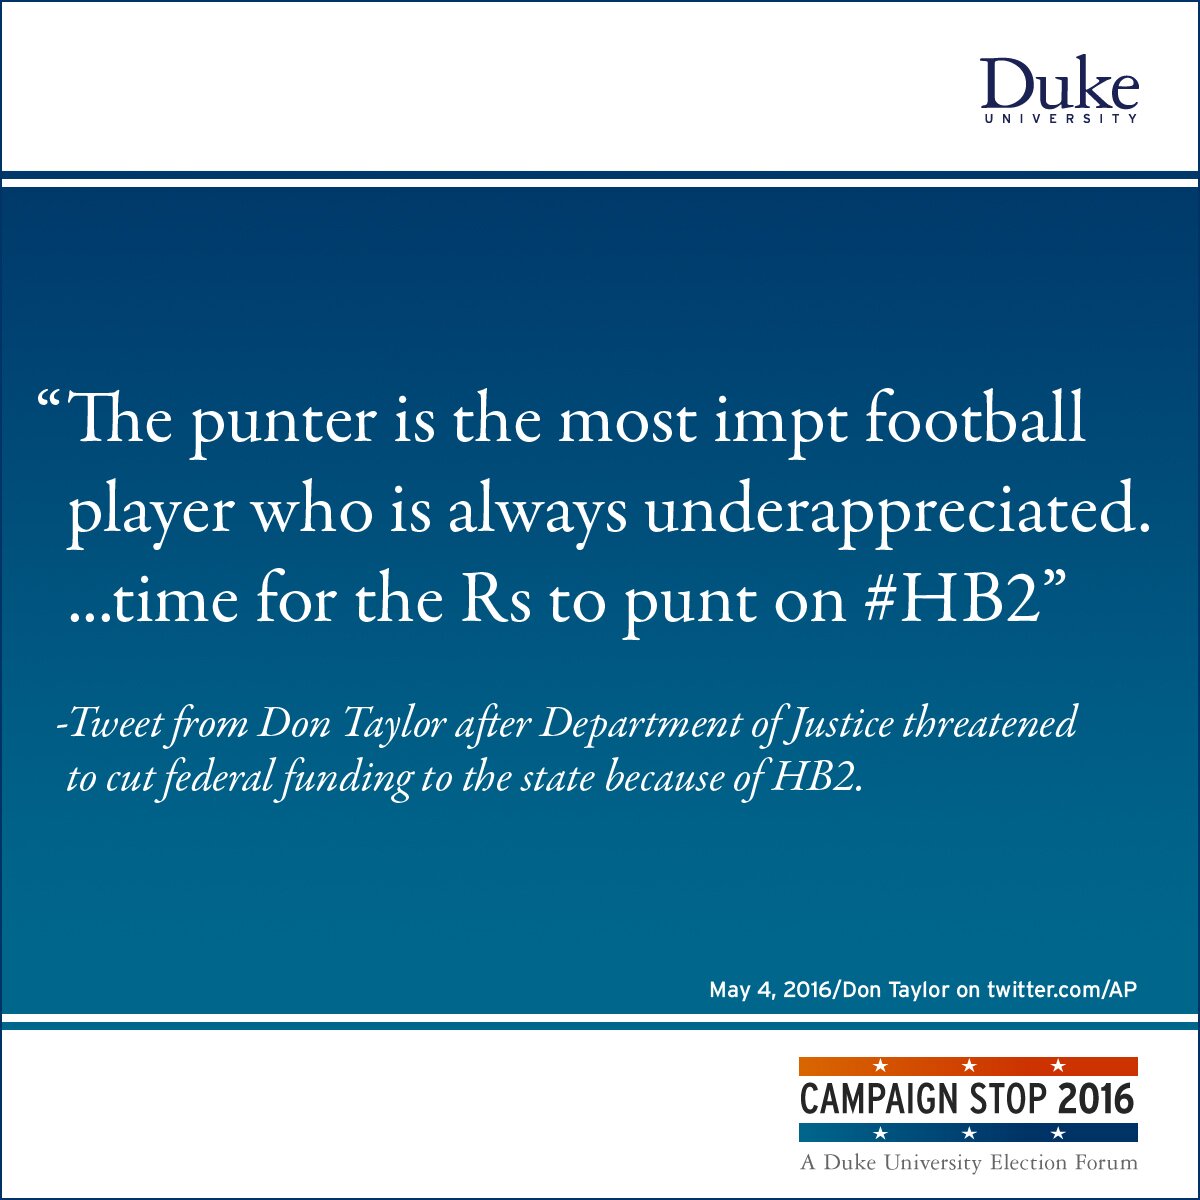 “The punter is the most impt football player who is always underappreciated. ...time for the Rs to punt on #HB2” -Tweet from Don Taylor after Department of Justice threatened to cut federal funding to the state because of HB2.